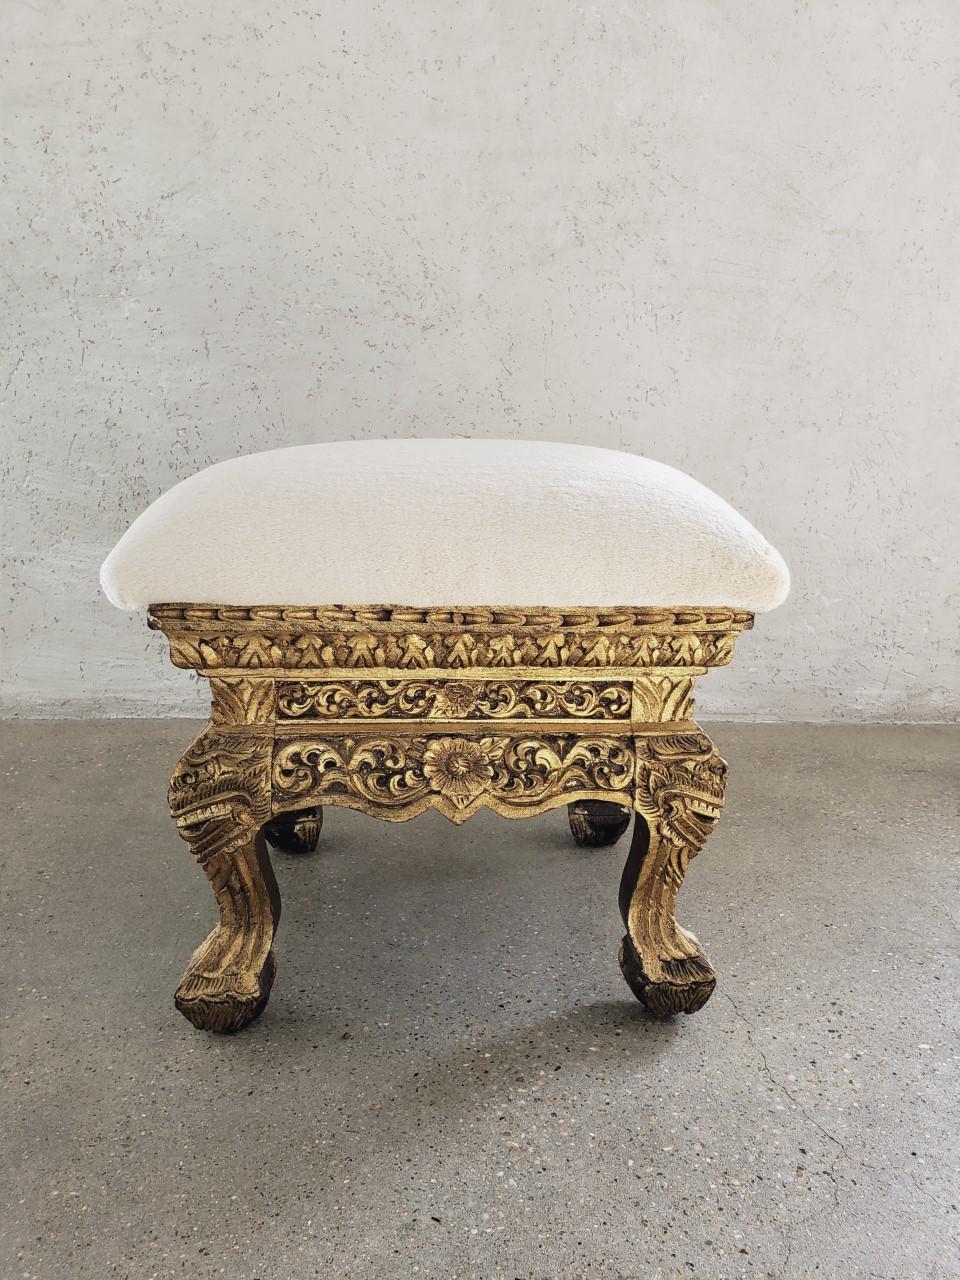 Originally used as a stand for incense, this gilt-wood Burmese stand has been re-imagined as a footstool/ottoman which is great for sitting, or using as a side table by incorporating a tray. Gorgeous carvings and patina make it a show stopper.

